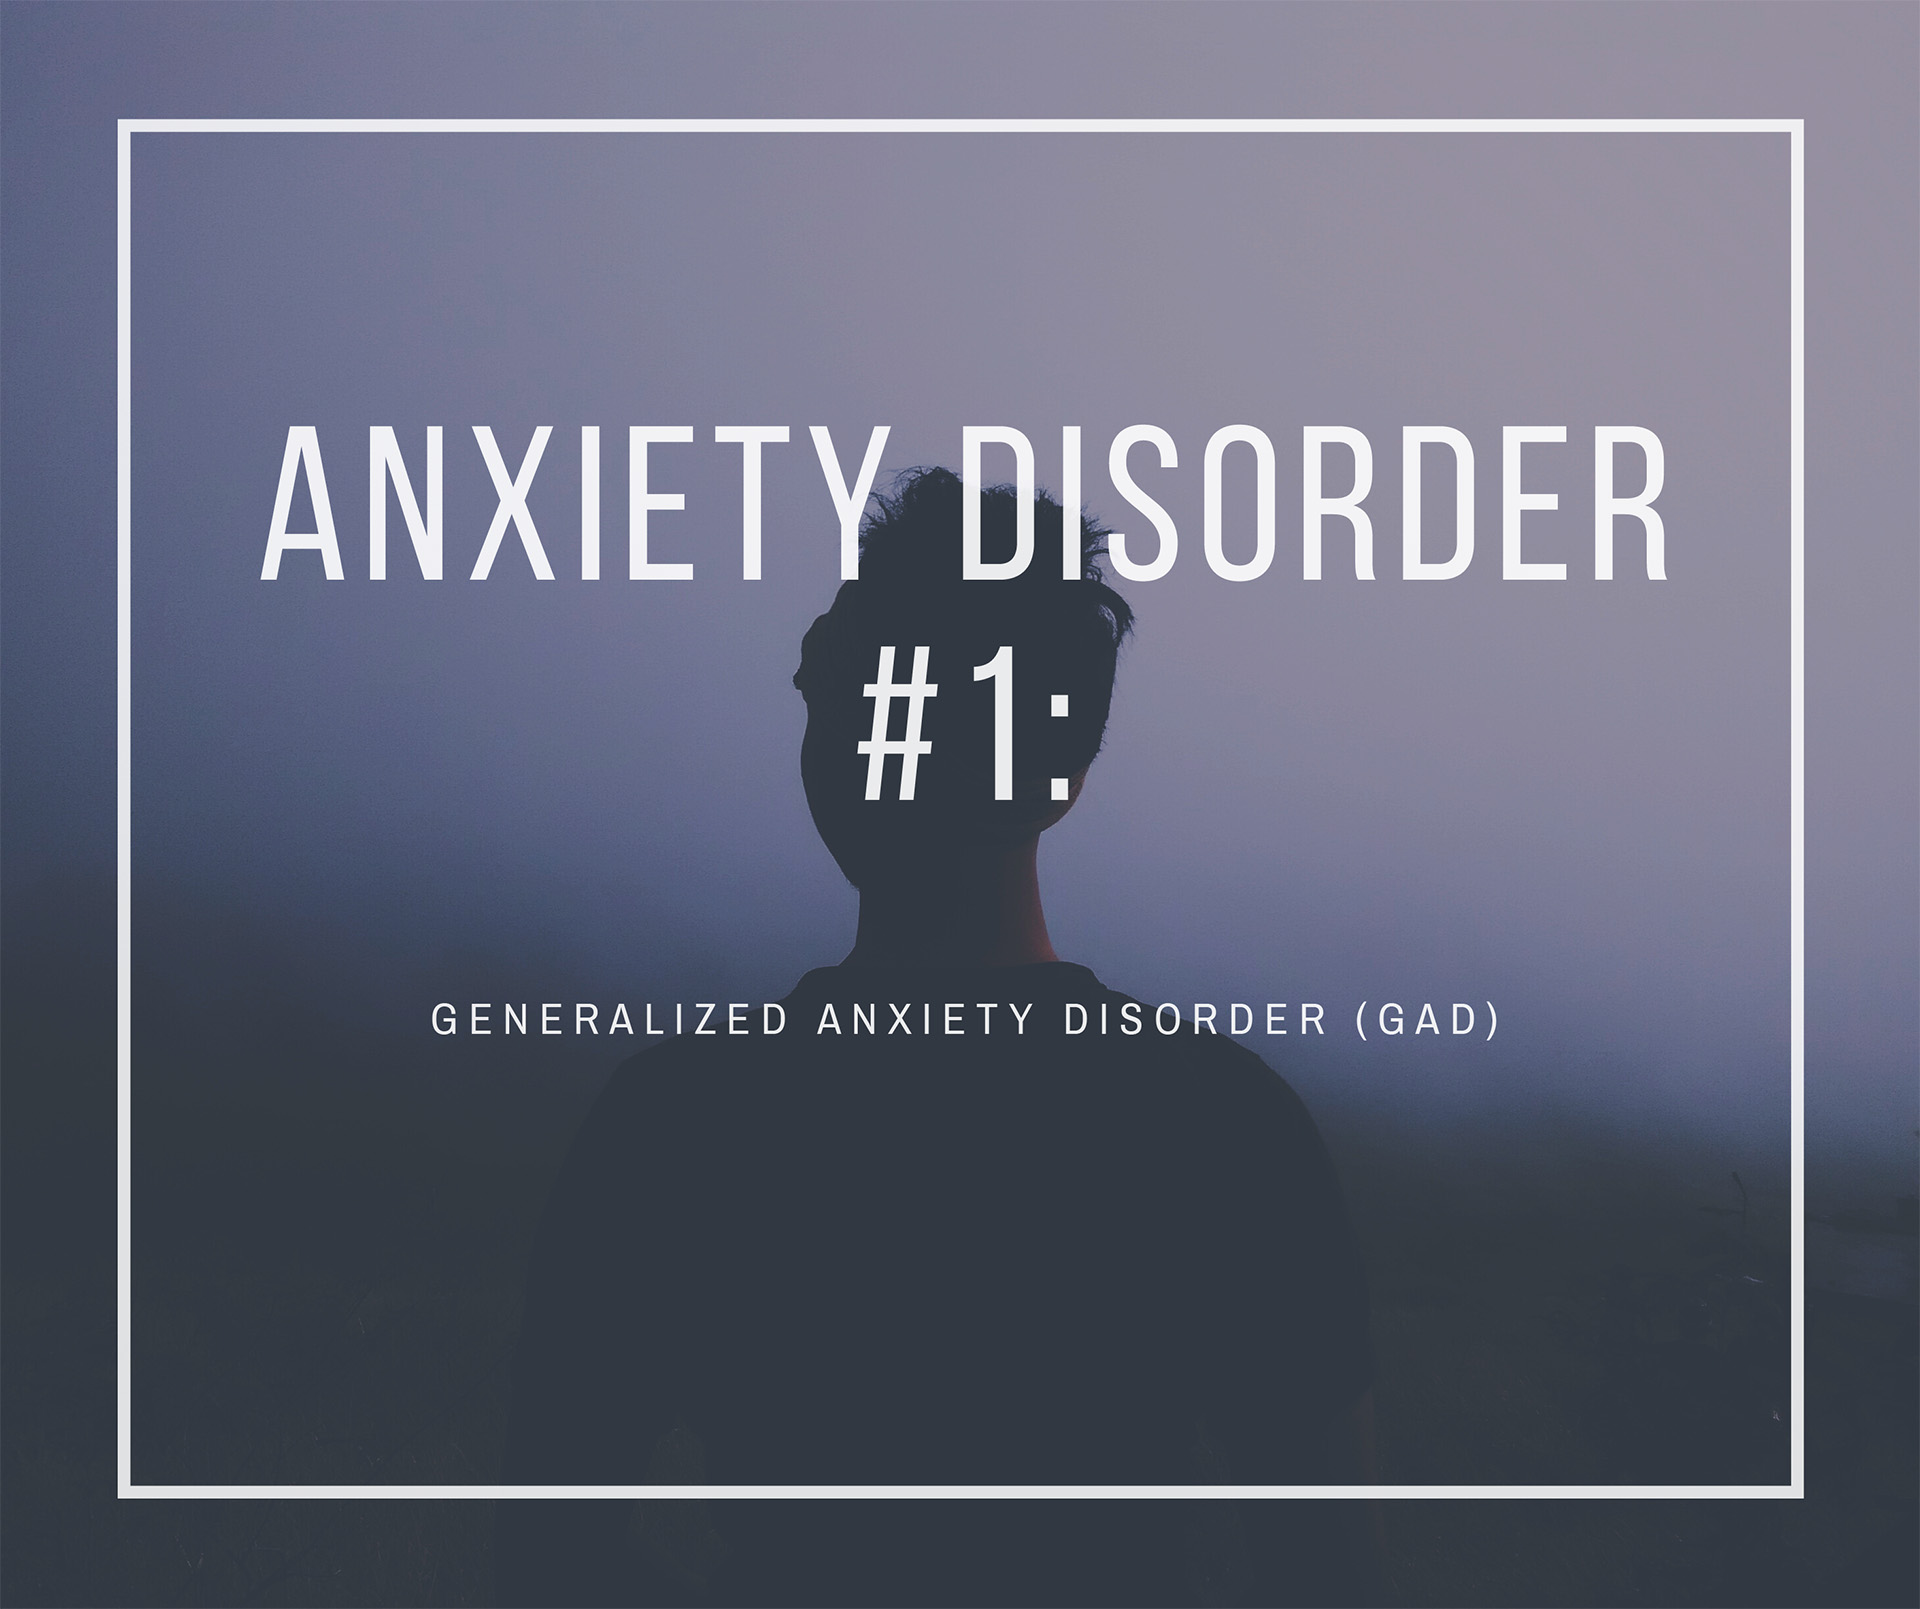 Anxiety Disorder # 1: Generalized Anxiety Disorder